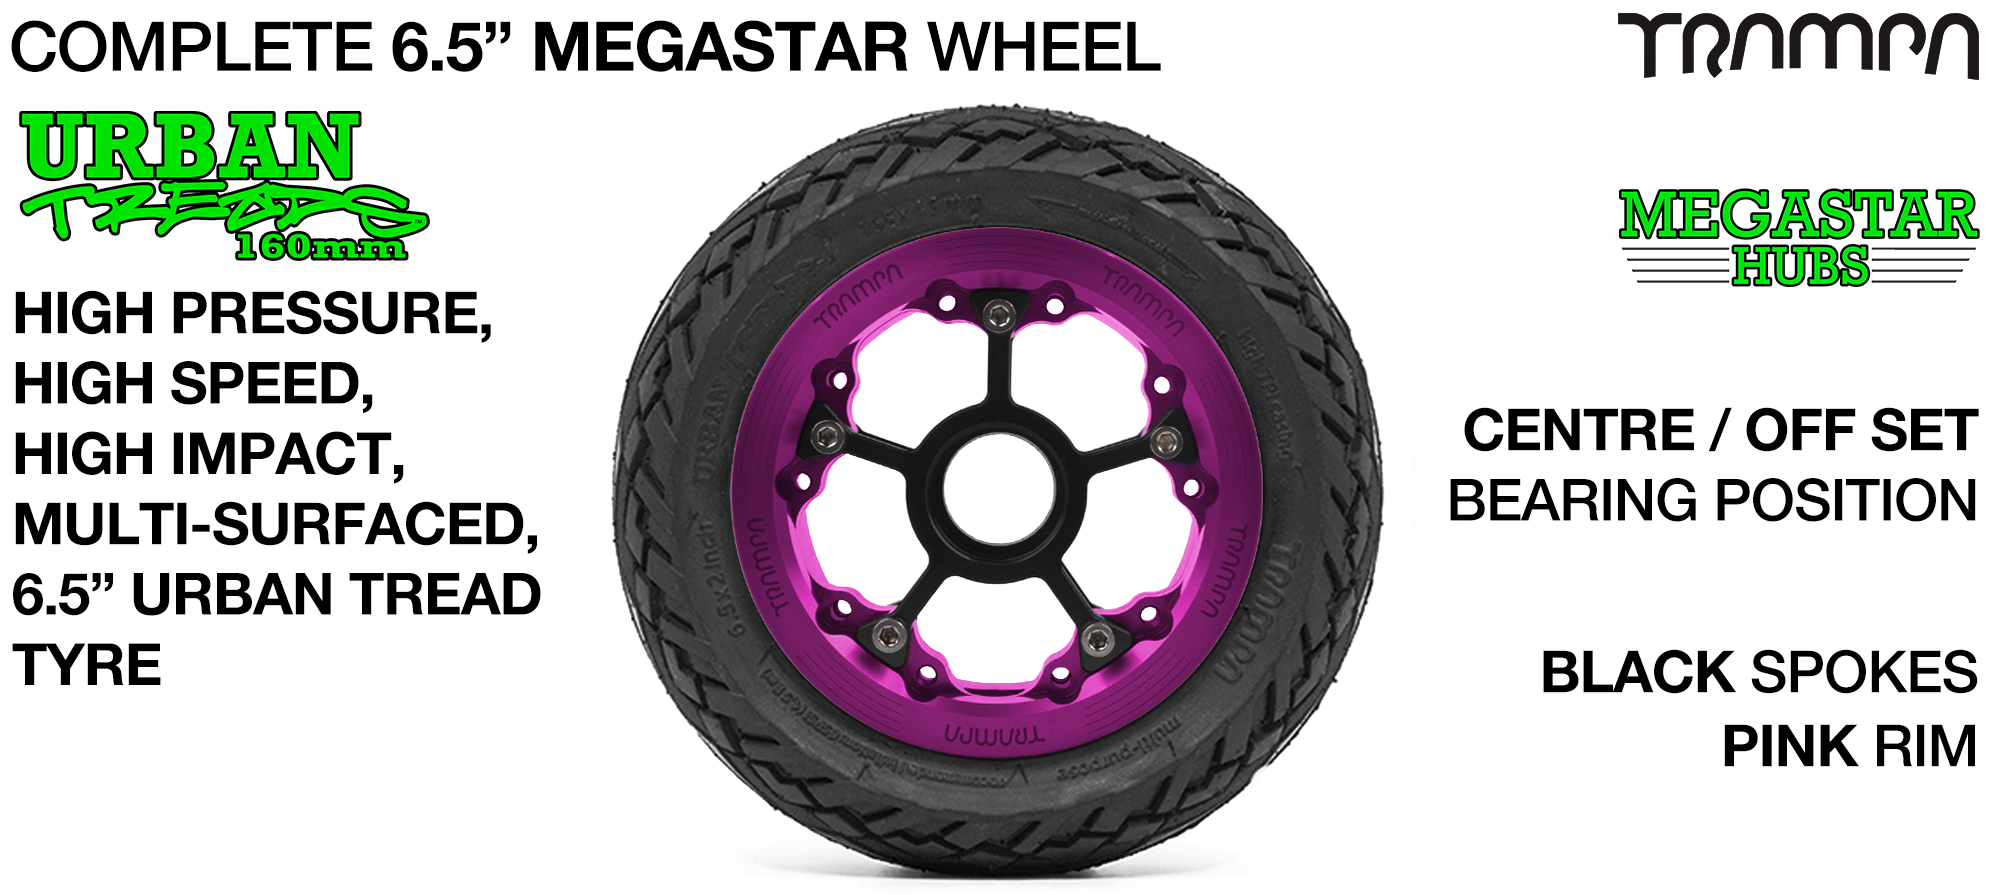 CENTER-SET MEGASTAR 8 Hub with PINK Rims & BLACK Spokes with the amazing Low Profile 6.5 Inch URBAN Treads Tyres